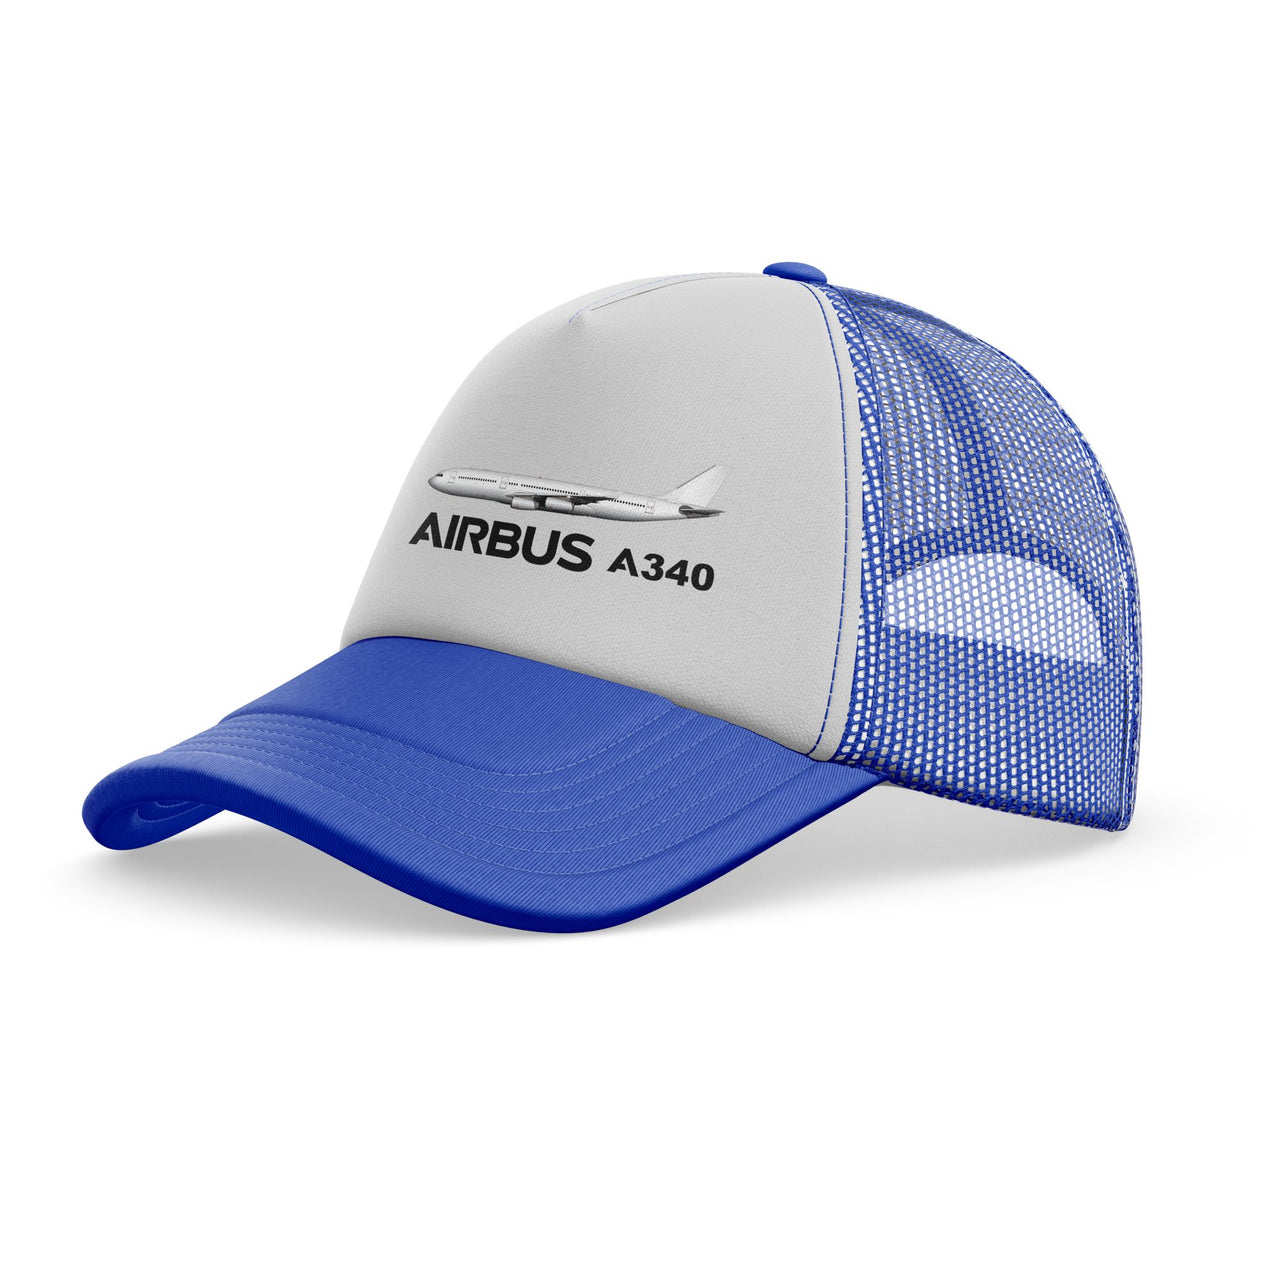 The Airbus A340 Designed Trucker Caps & Hats